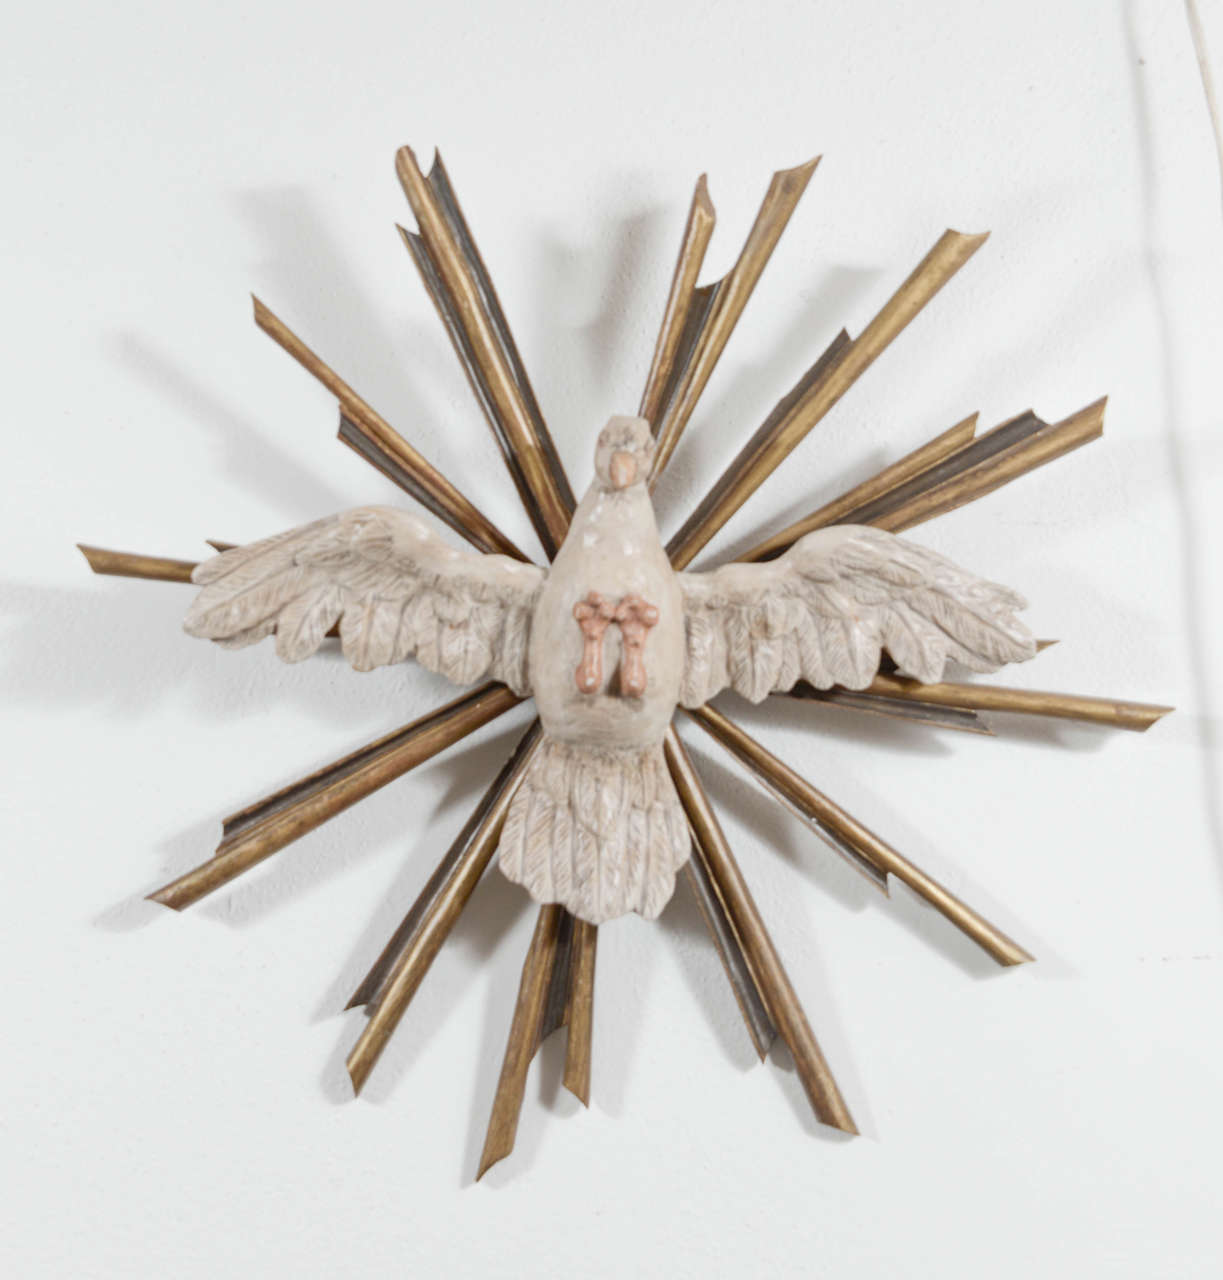 Italian, Wood carved holy spirt dove burst from the 19th century.
Used above alters in the catholic church and above scenes of mary and Jesus.